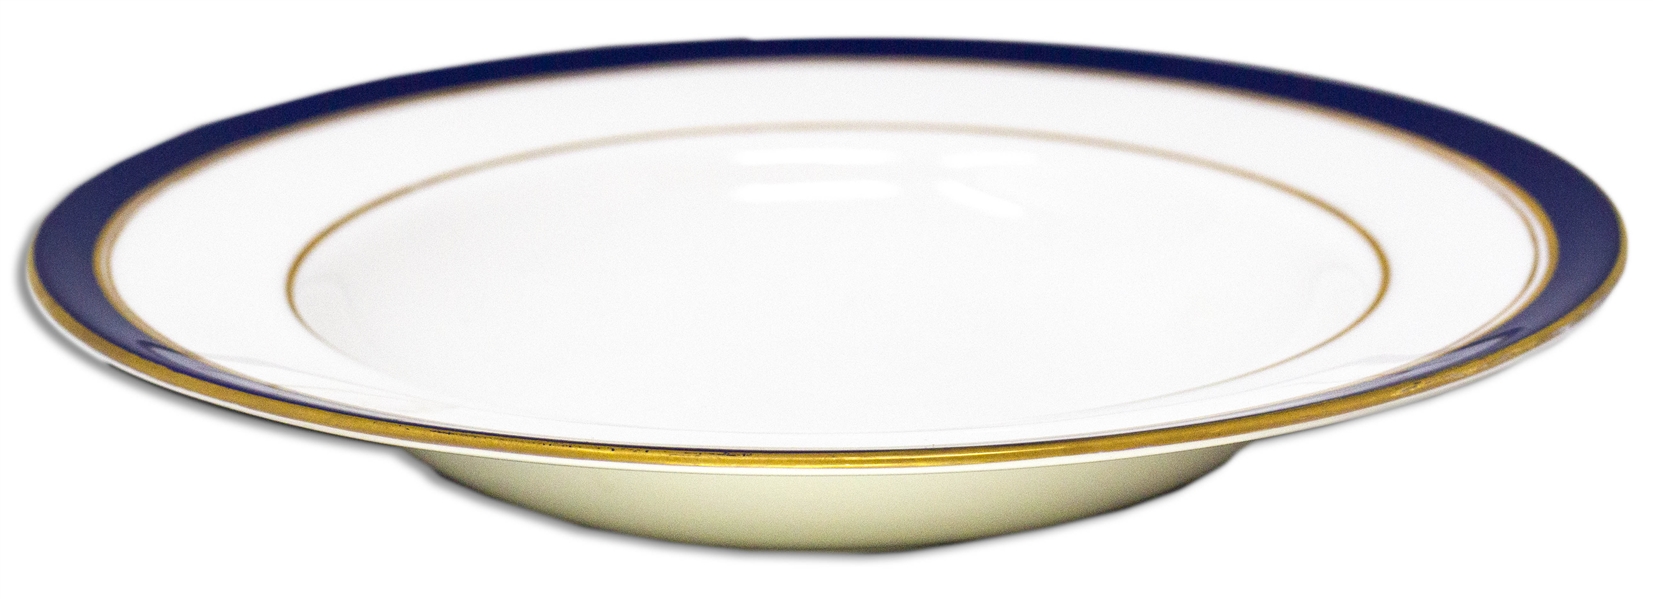 Margaret Thatcher Personally Owned Royal Worcester China From Her Time as Prime Minister